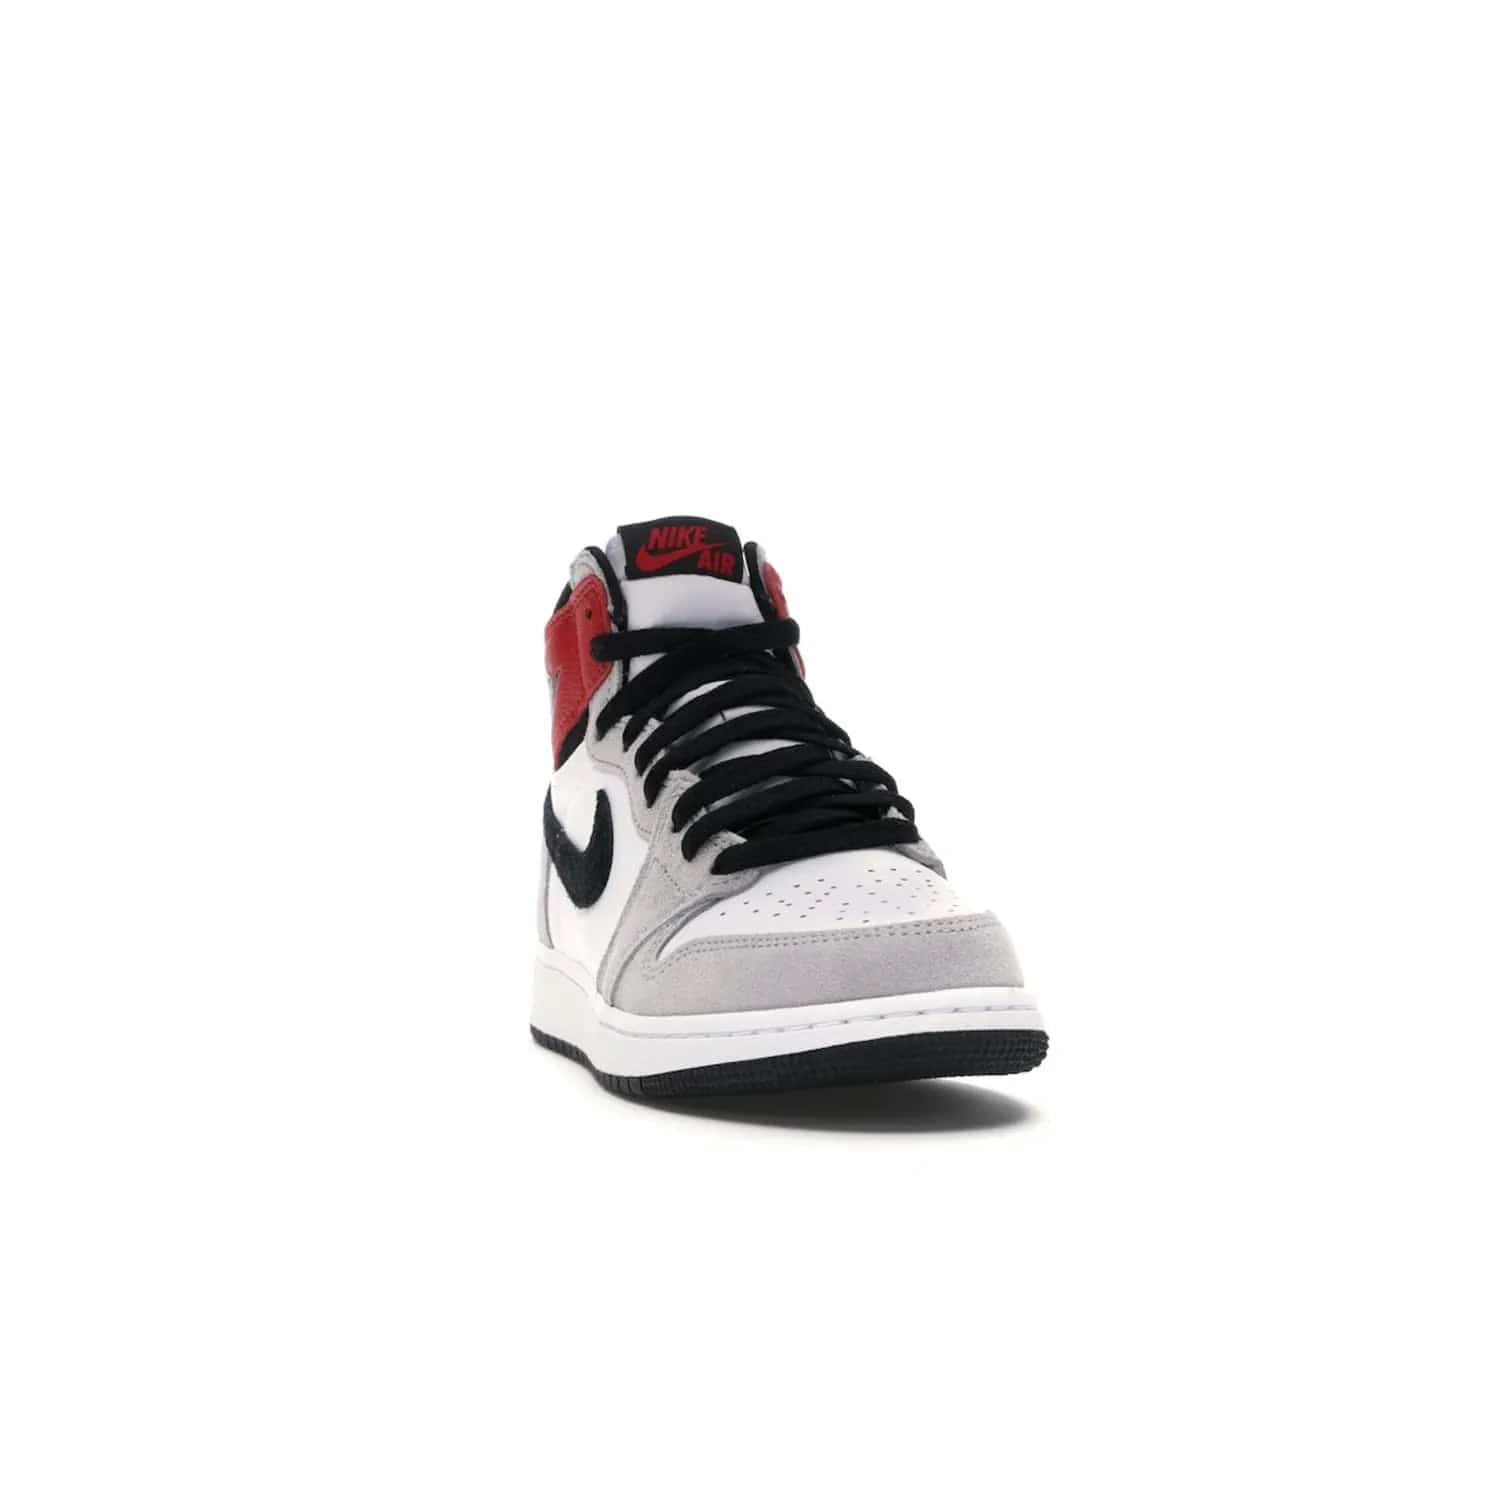 Jordan 1 Retro High Light Smoke Grey (GS) - Image 8 - Only at www.BallersClubKickz.com - Jordan 1 Retro High Light Smoke Grey (GS) features shades of grey, black, and Varsity Red with a bold silhouette. Premium white leather and suede overlays create a unique look. Released July 2020, offering style and performance. Perfect sneaker for any collector or fan.